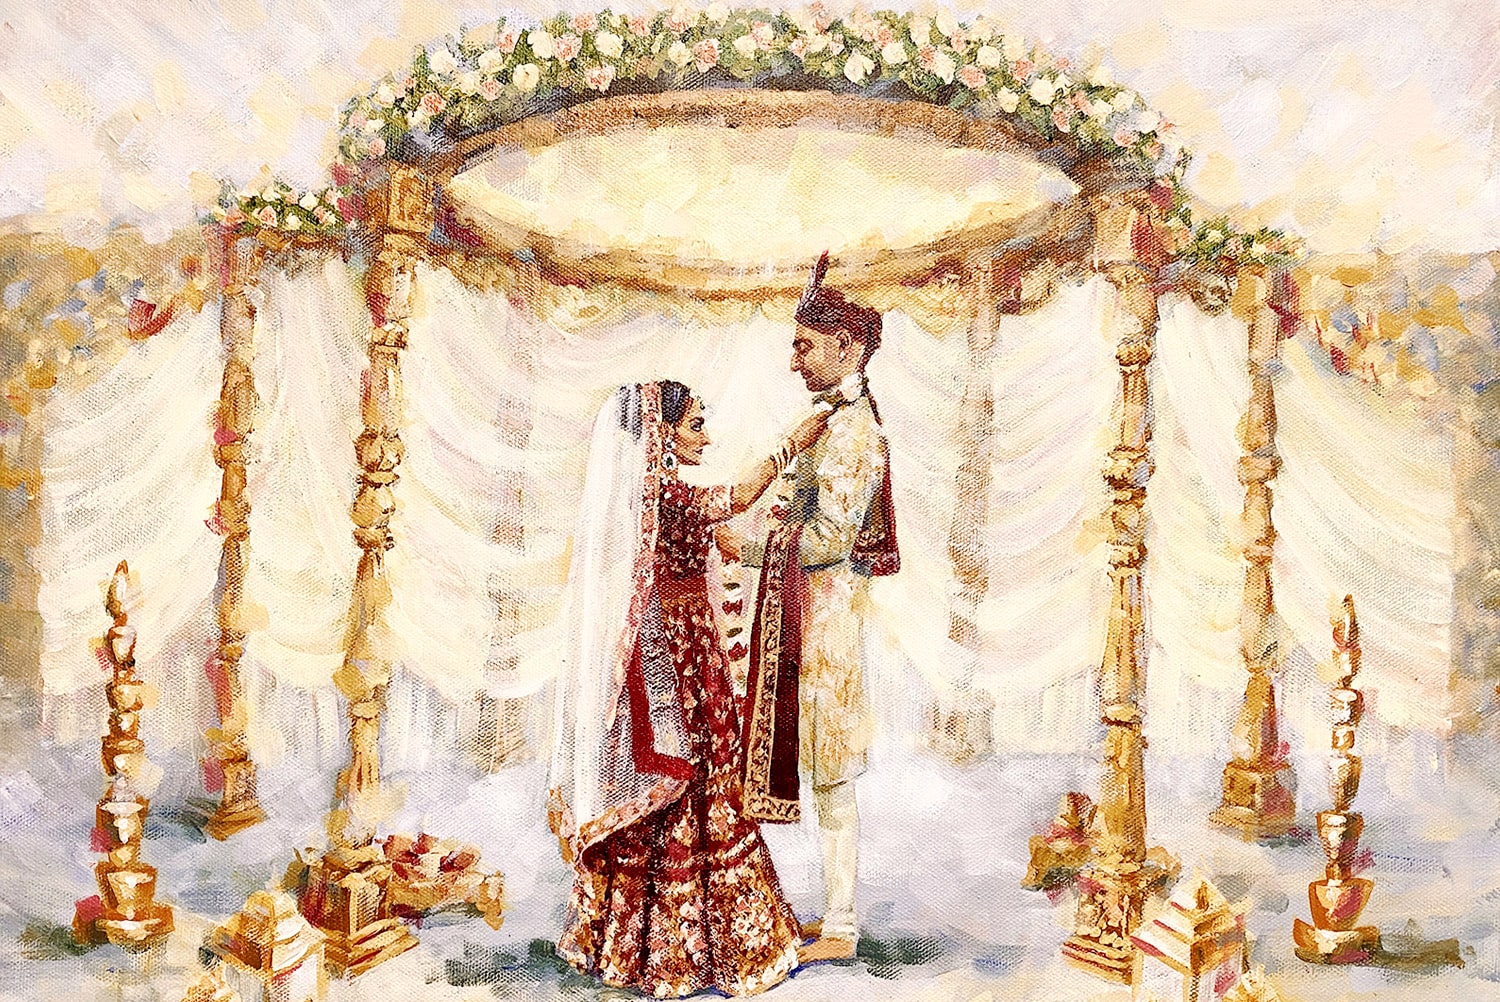 uk live wedding painting and guest portrait illustration package and price